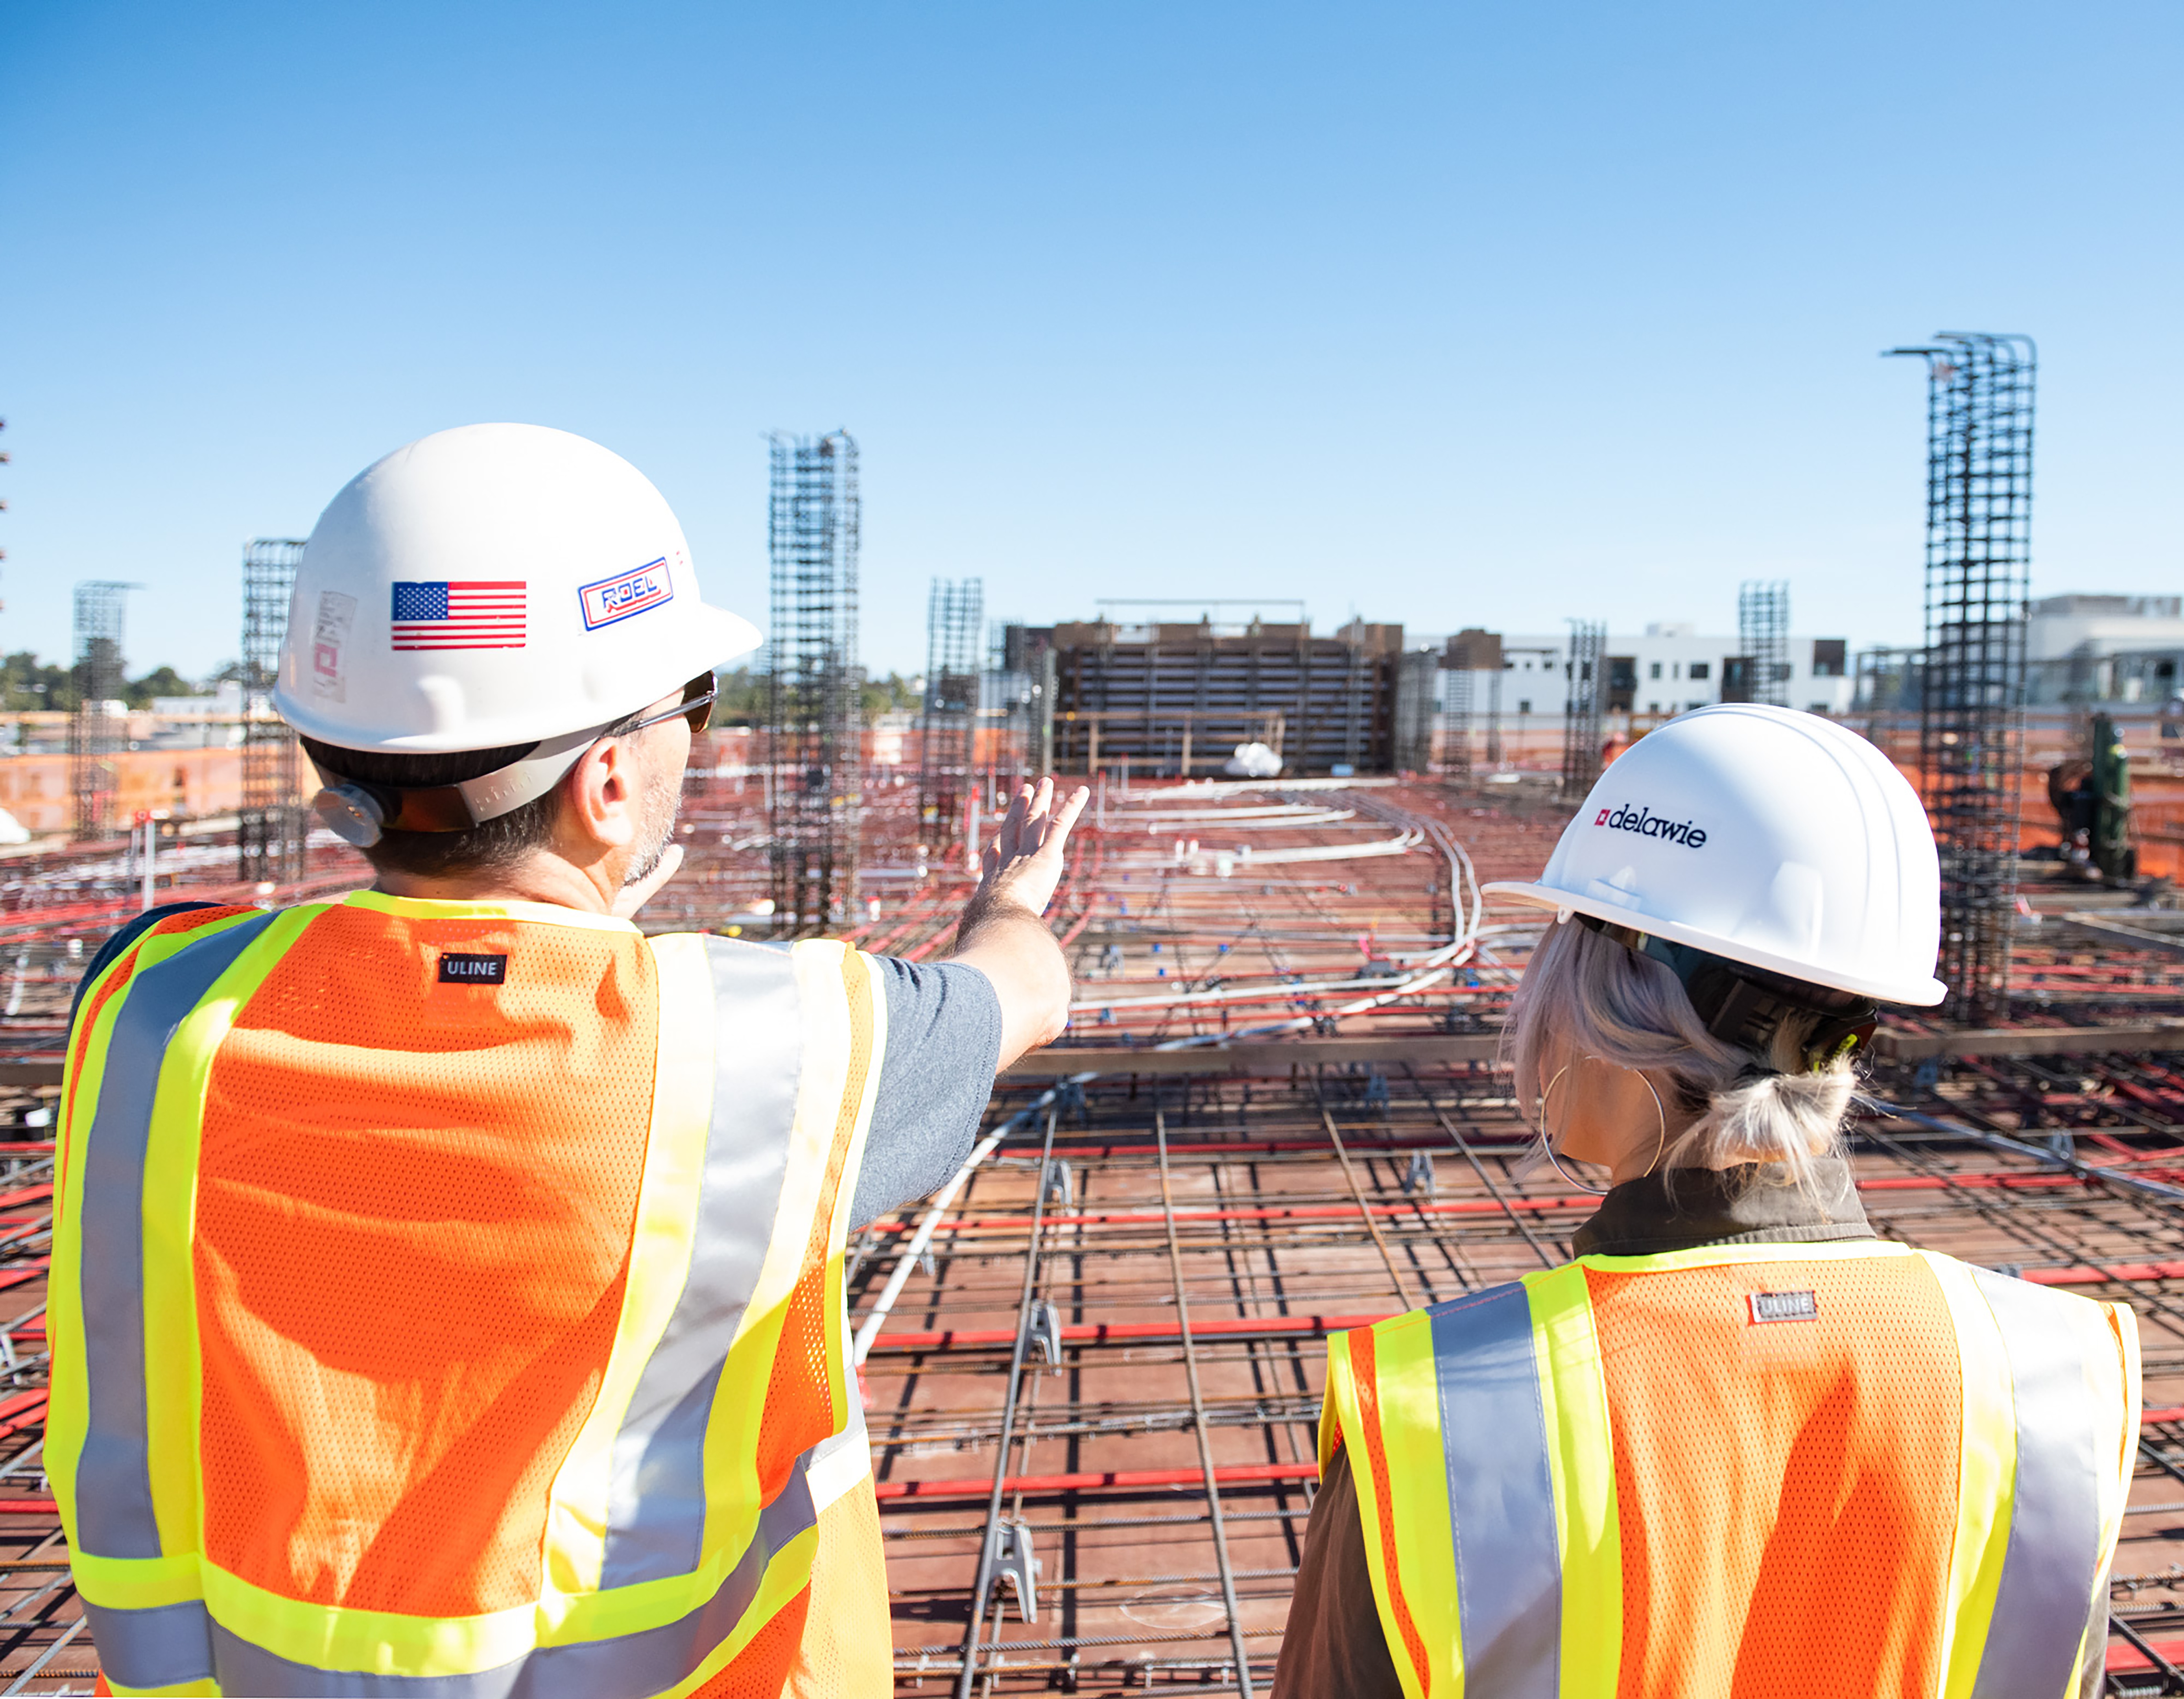 Using a learning management system for your construction training program can help take it to the next level.